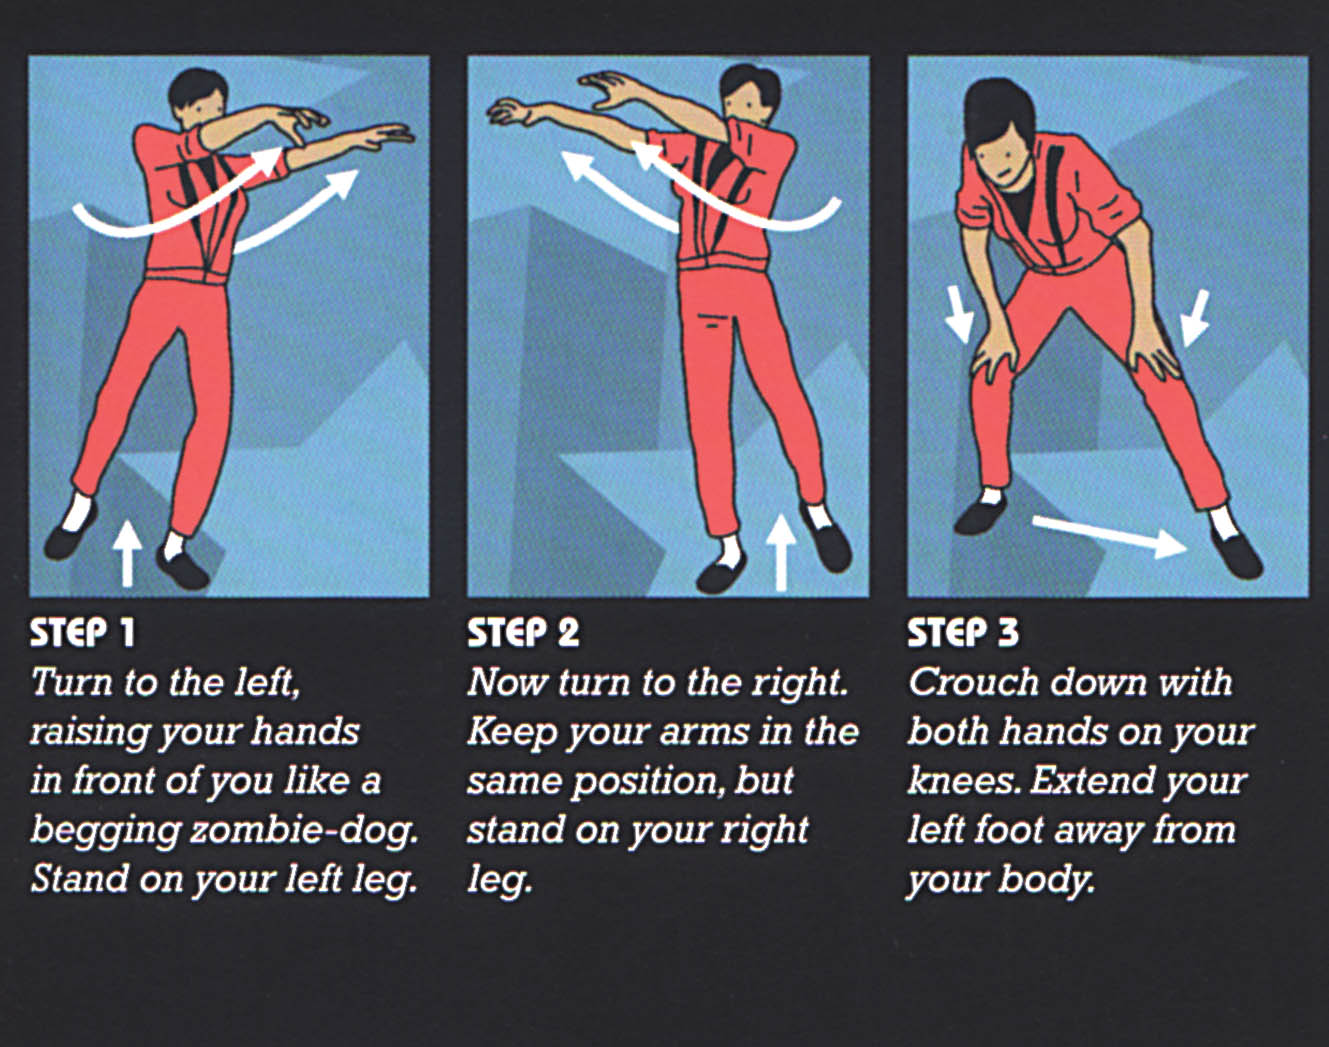 Examples of Michael Jackson's Thriller moves 